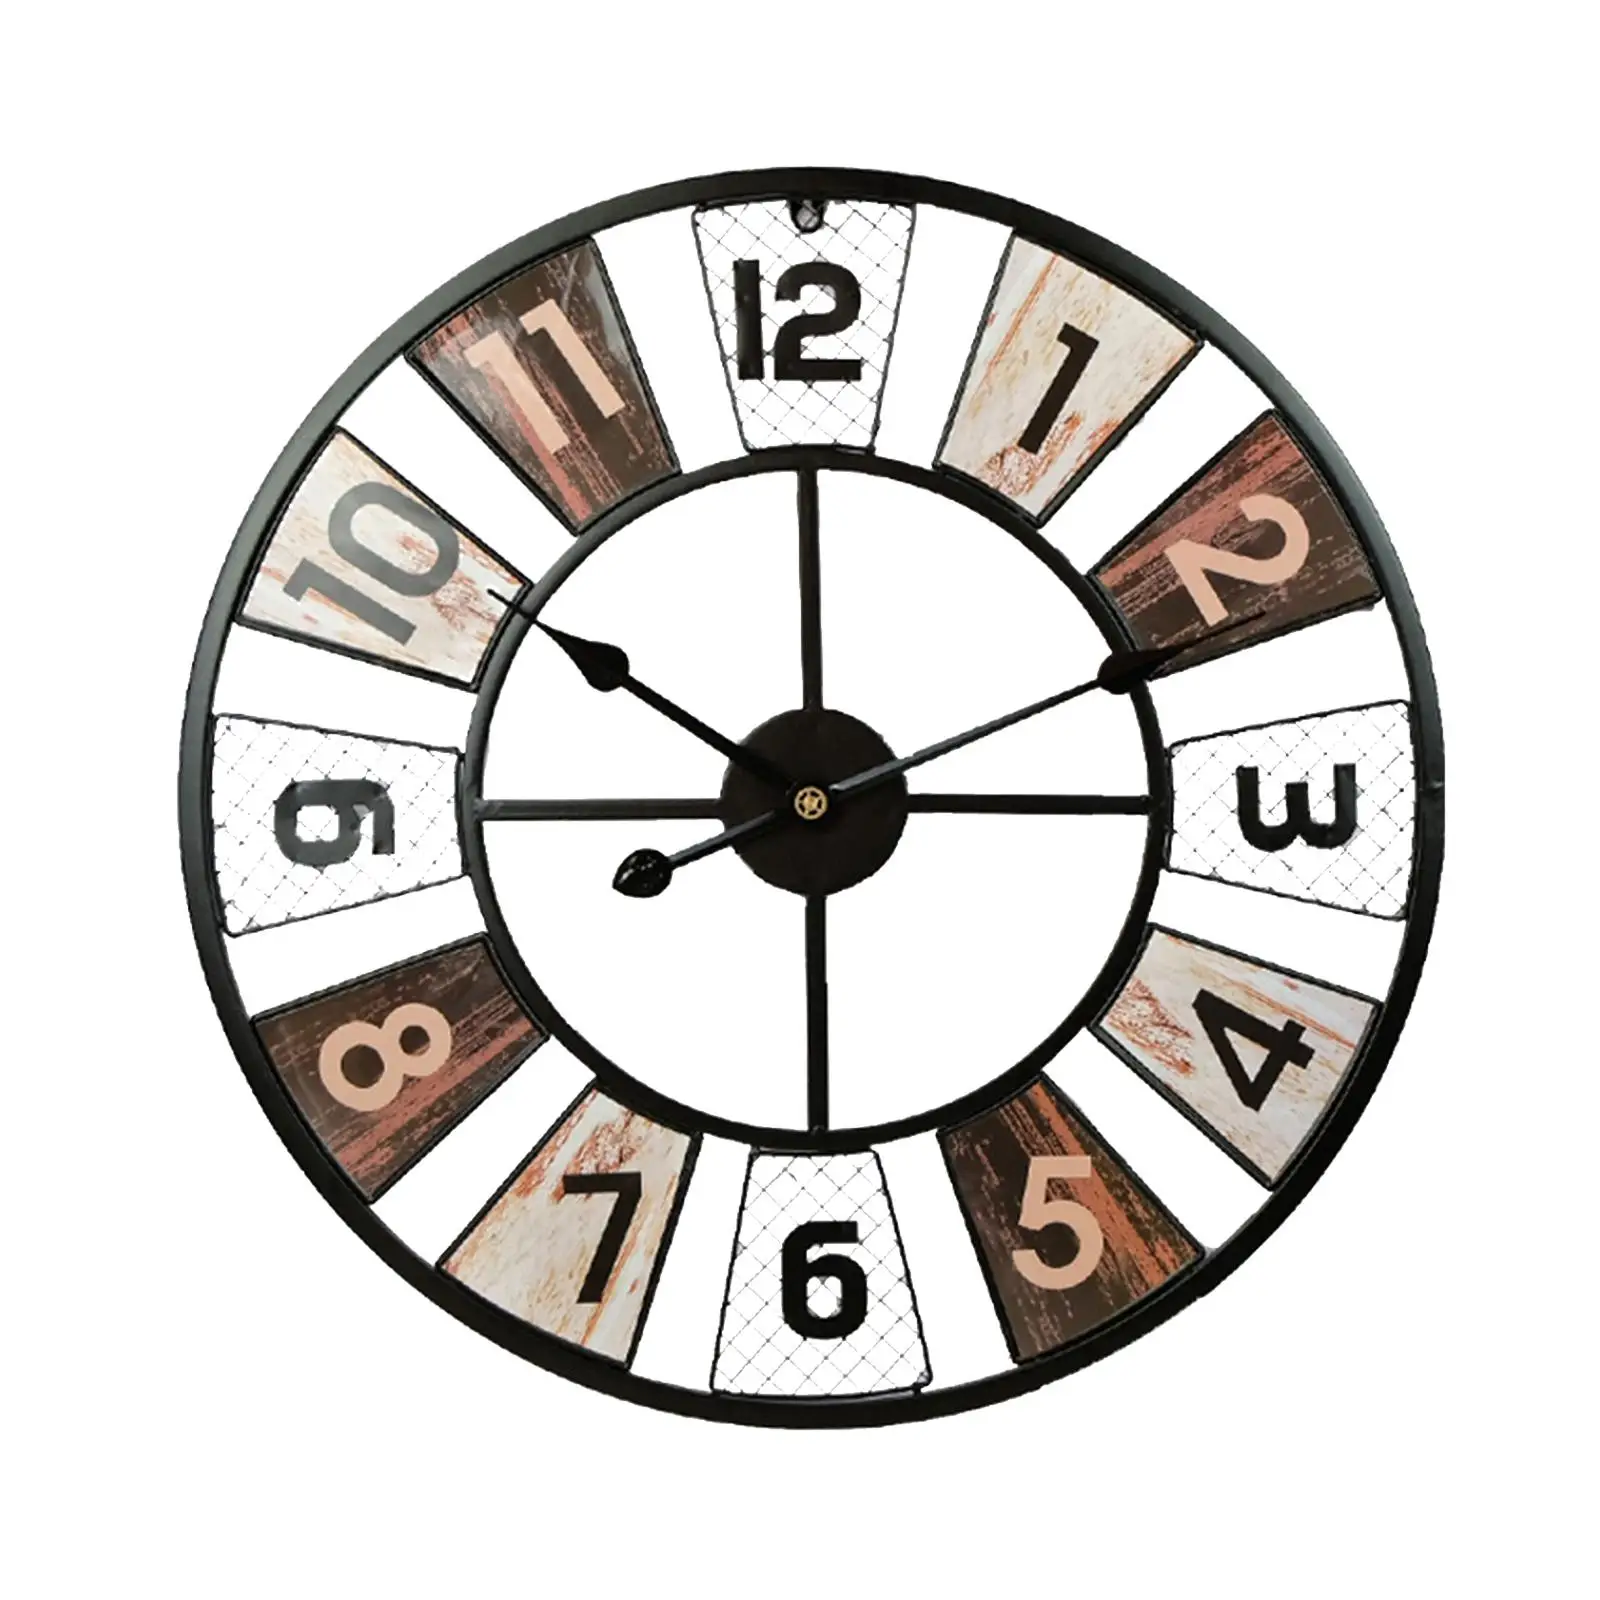 Large Wall Clock 24Inches Decorative Wall Clocks for Home Living Room Wall Decor